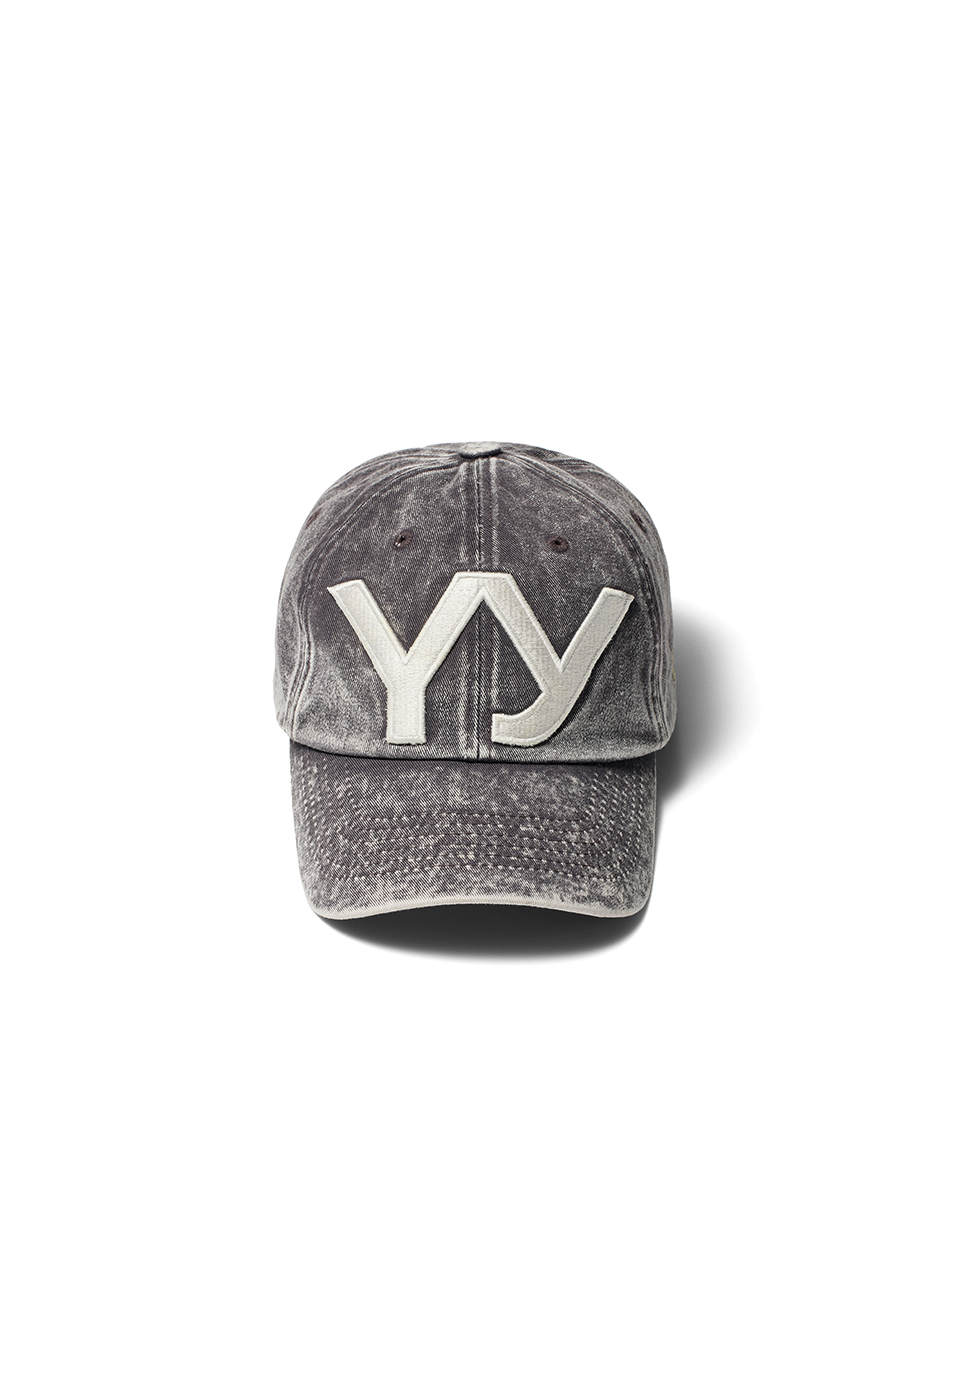 [5/7 DELIVERY] YY COTTON BALL CAP, BROWN